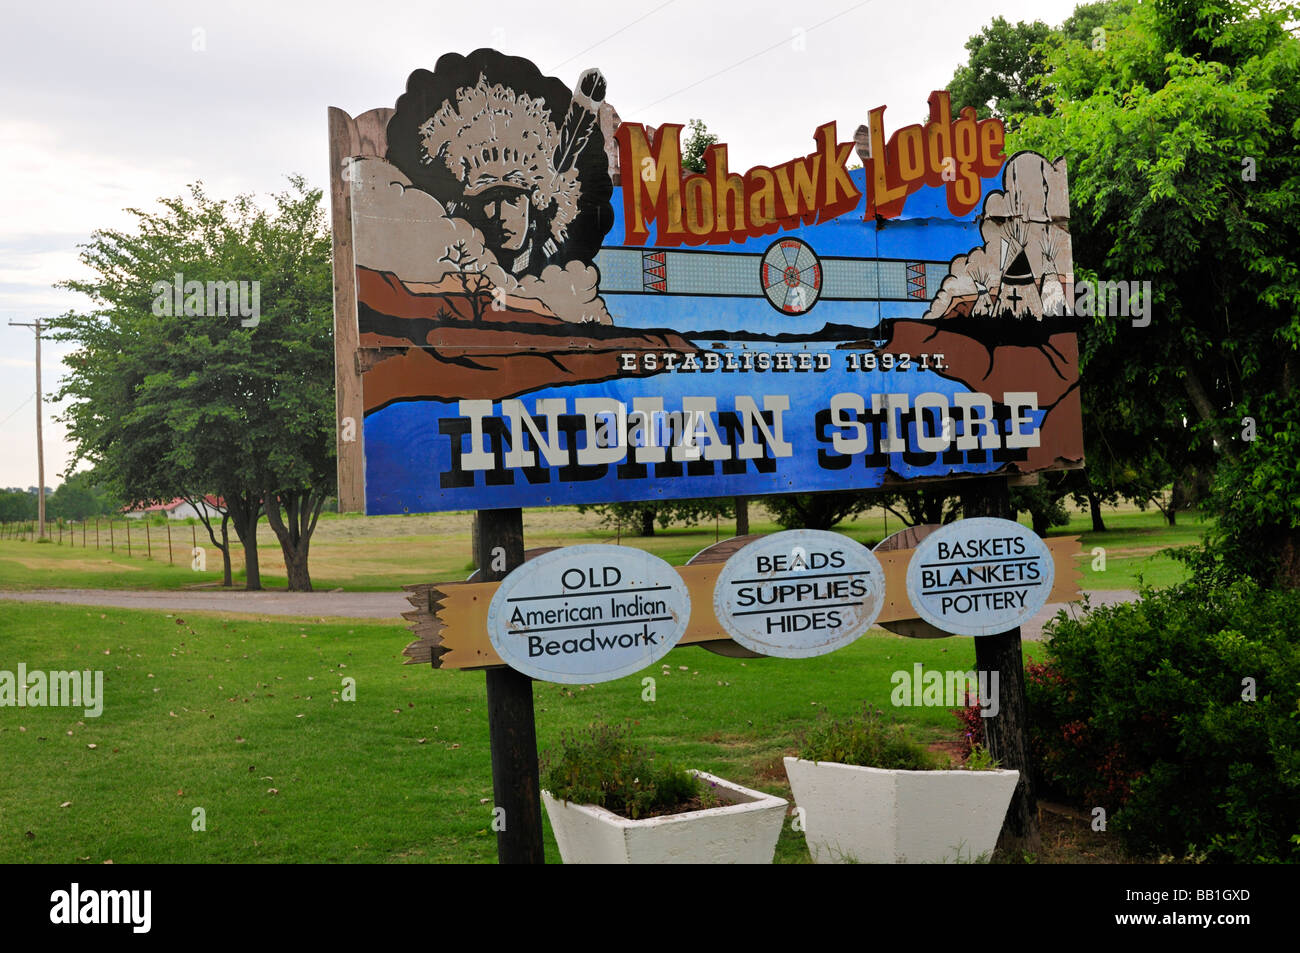 Sign announcing the Mohawk Lodge Indian Store in Clinton Oklahoma Stock Photo